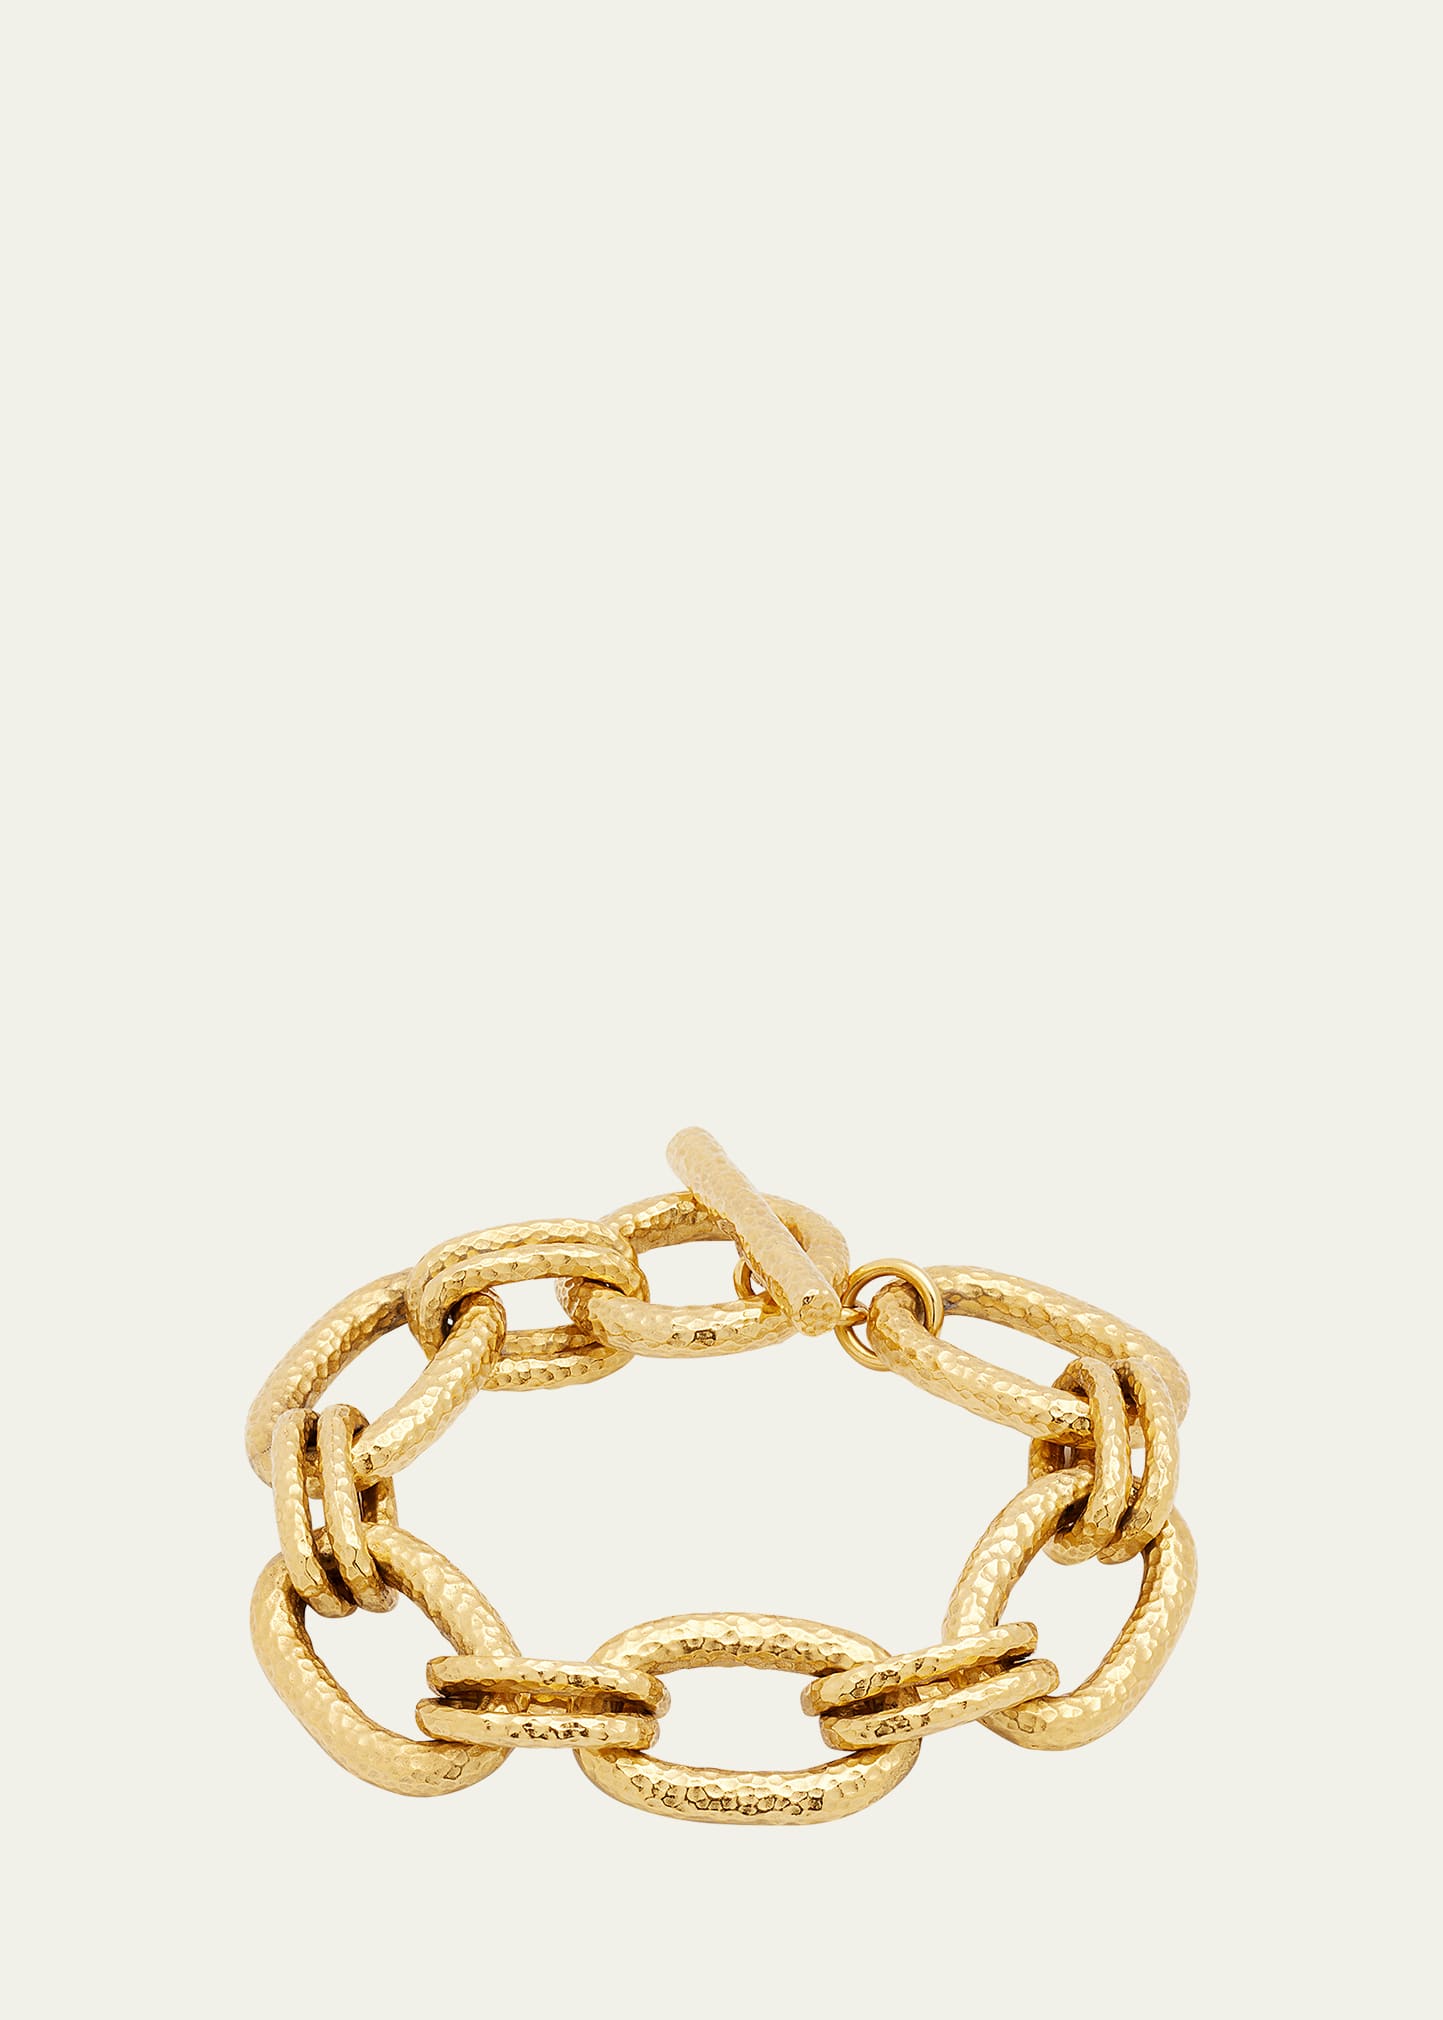 24K Hammered Chunky Cable Chain Bracelet